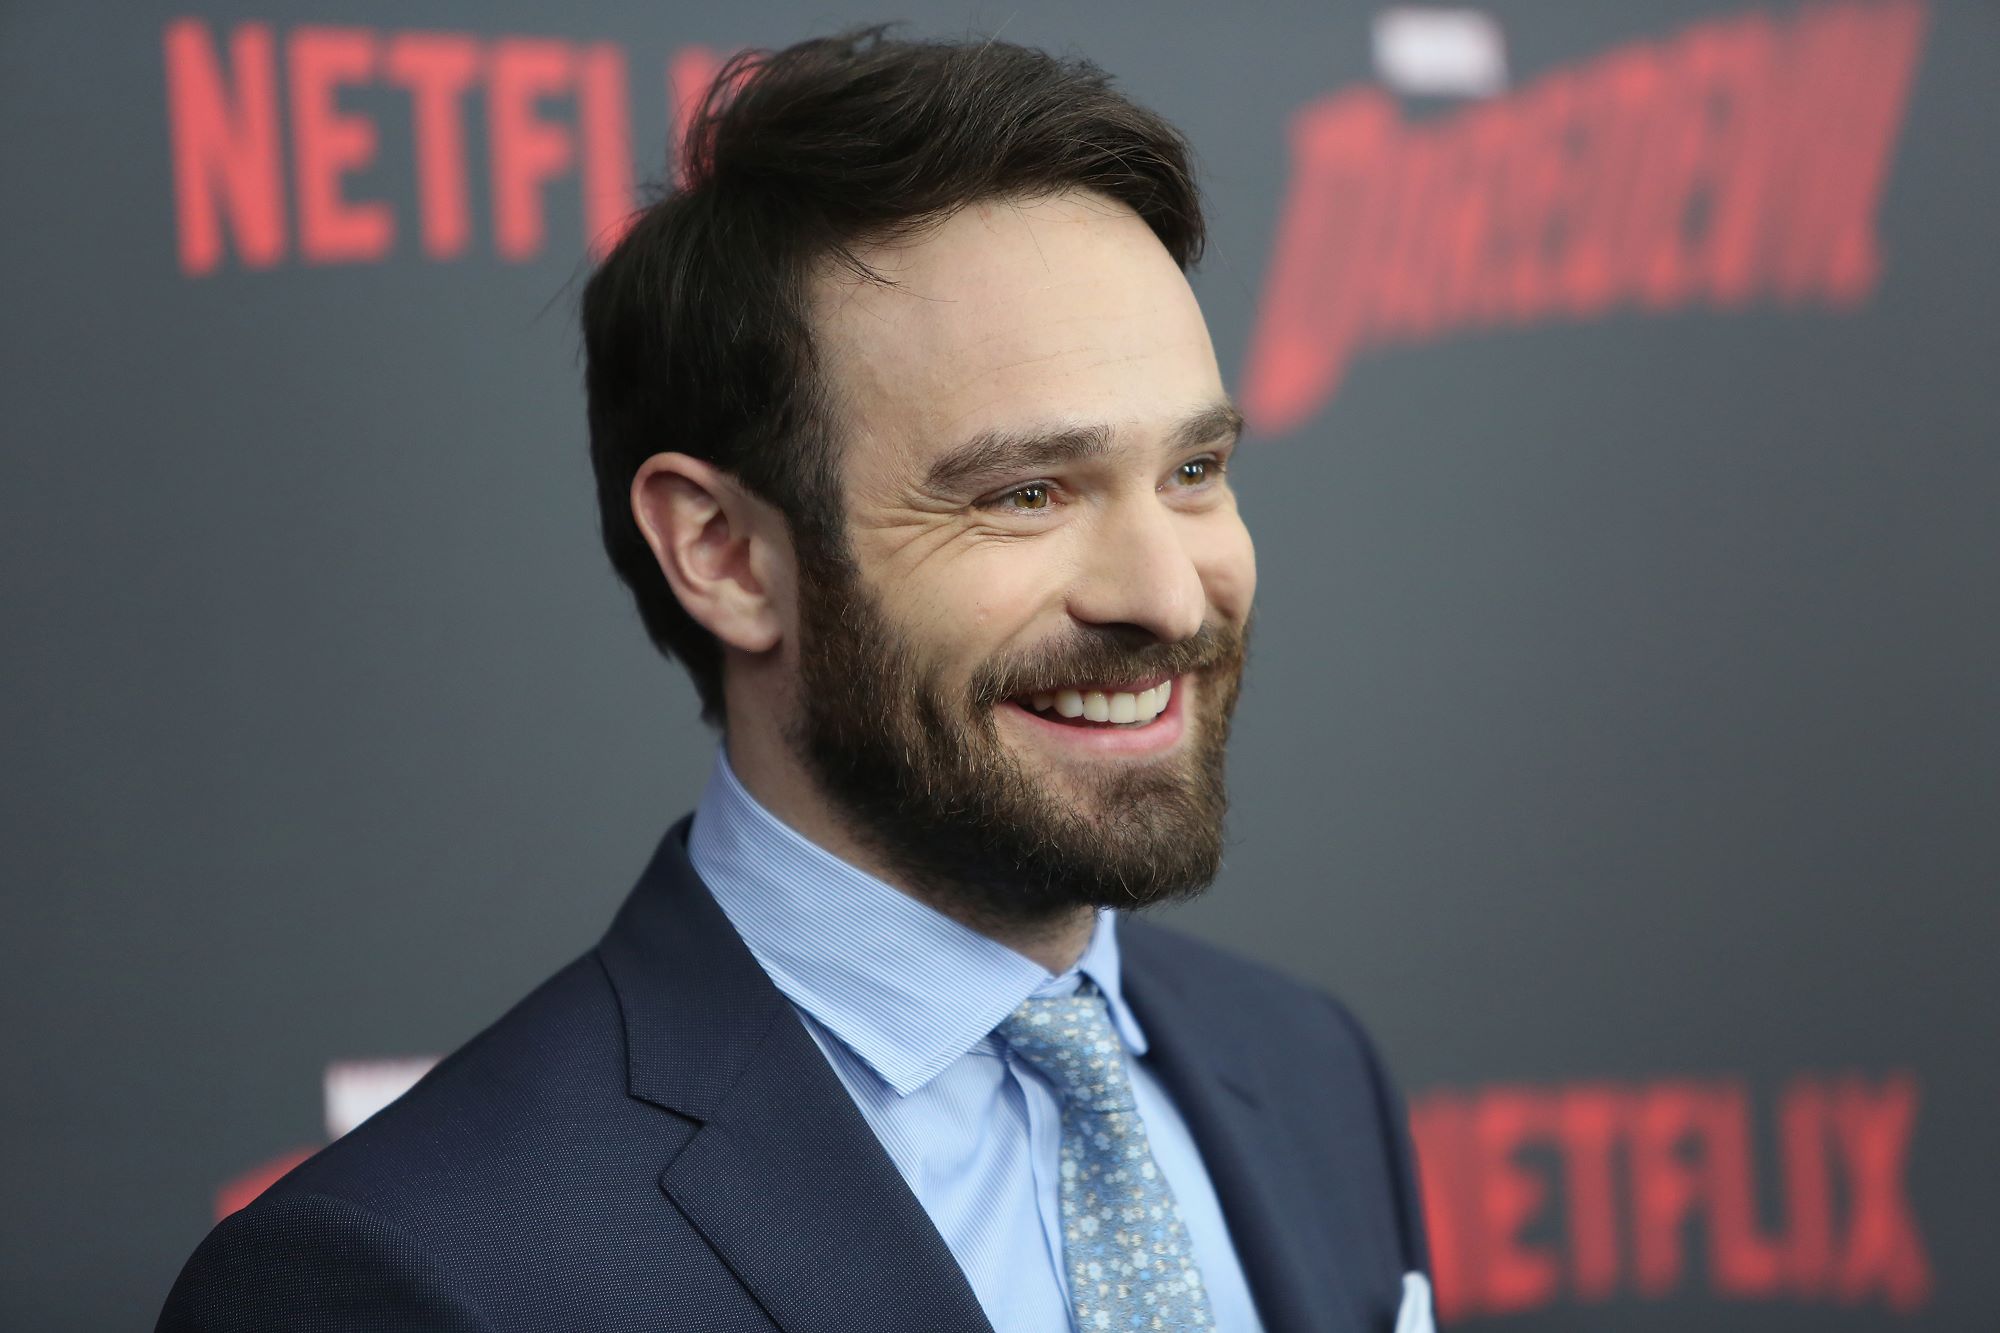 Netflix's 'Daredevil' star Charlie Cox wears a dark blue suit over a light blue button-up shirt and blue patterned tie.